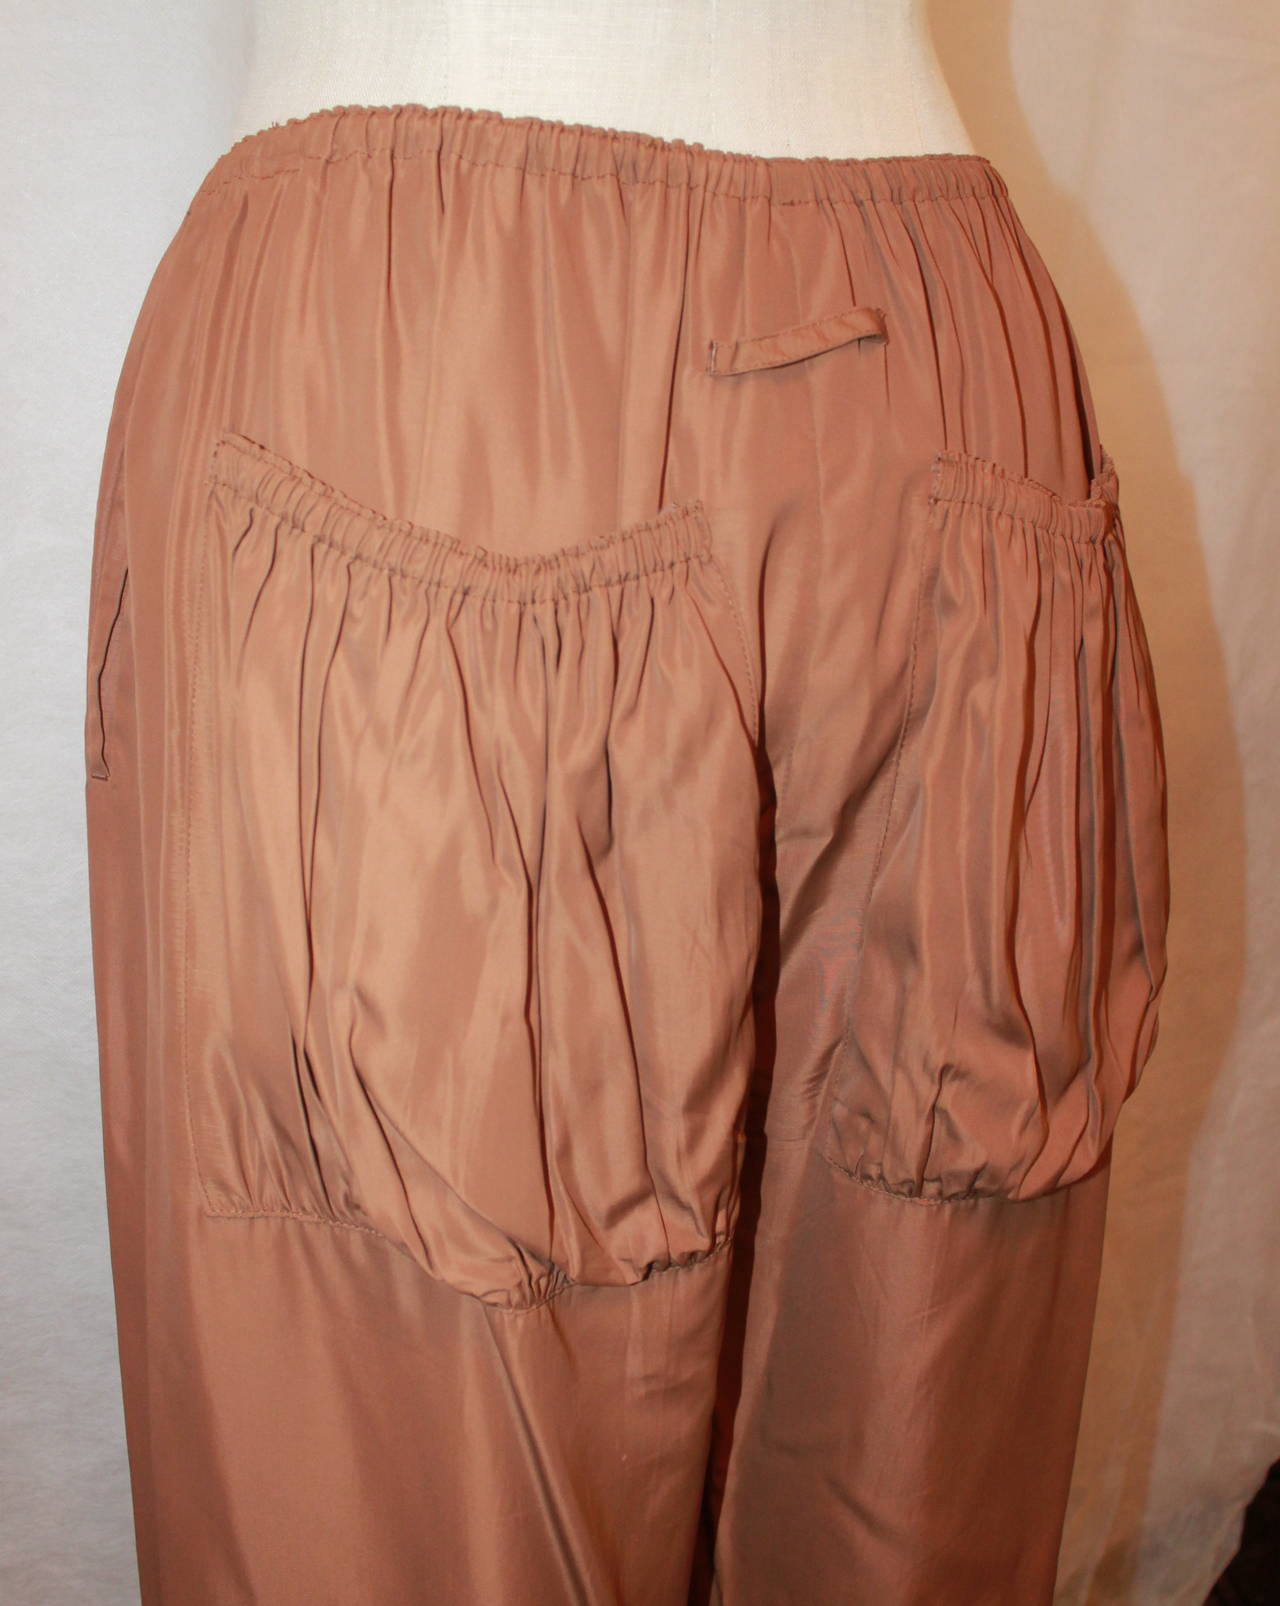 Jean Paul Gaultier 2000s Brown Drawstring Palazzo Pants with Scrunch Pockets - 8 1